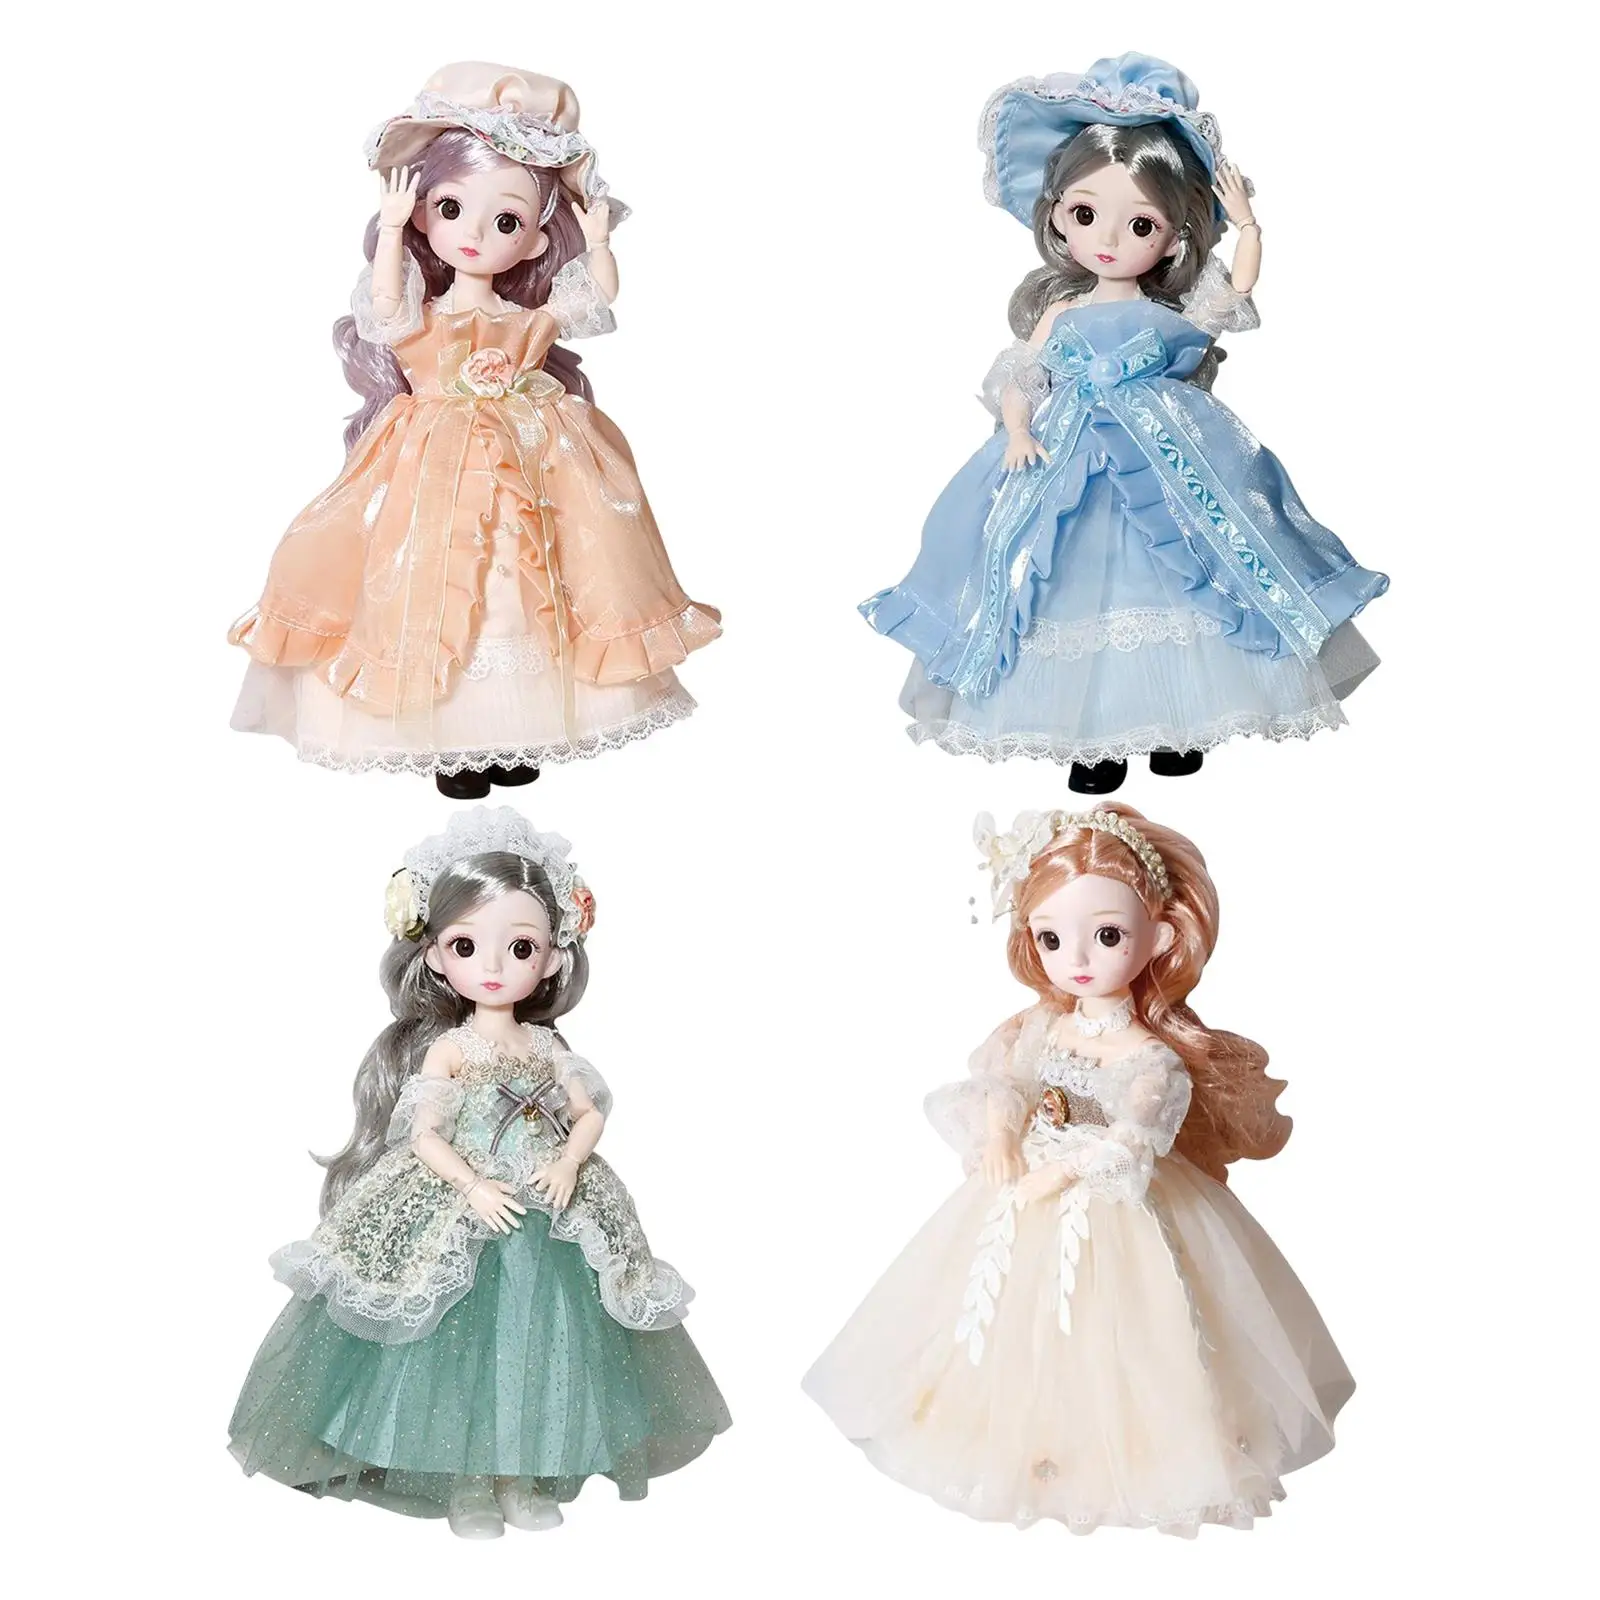 30cm Little Doll Makeup Doll Ball Joints Doll for Girls Children Gifts